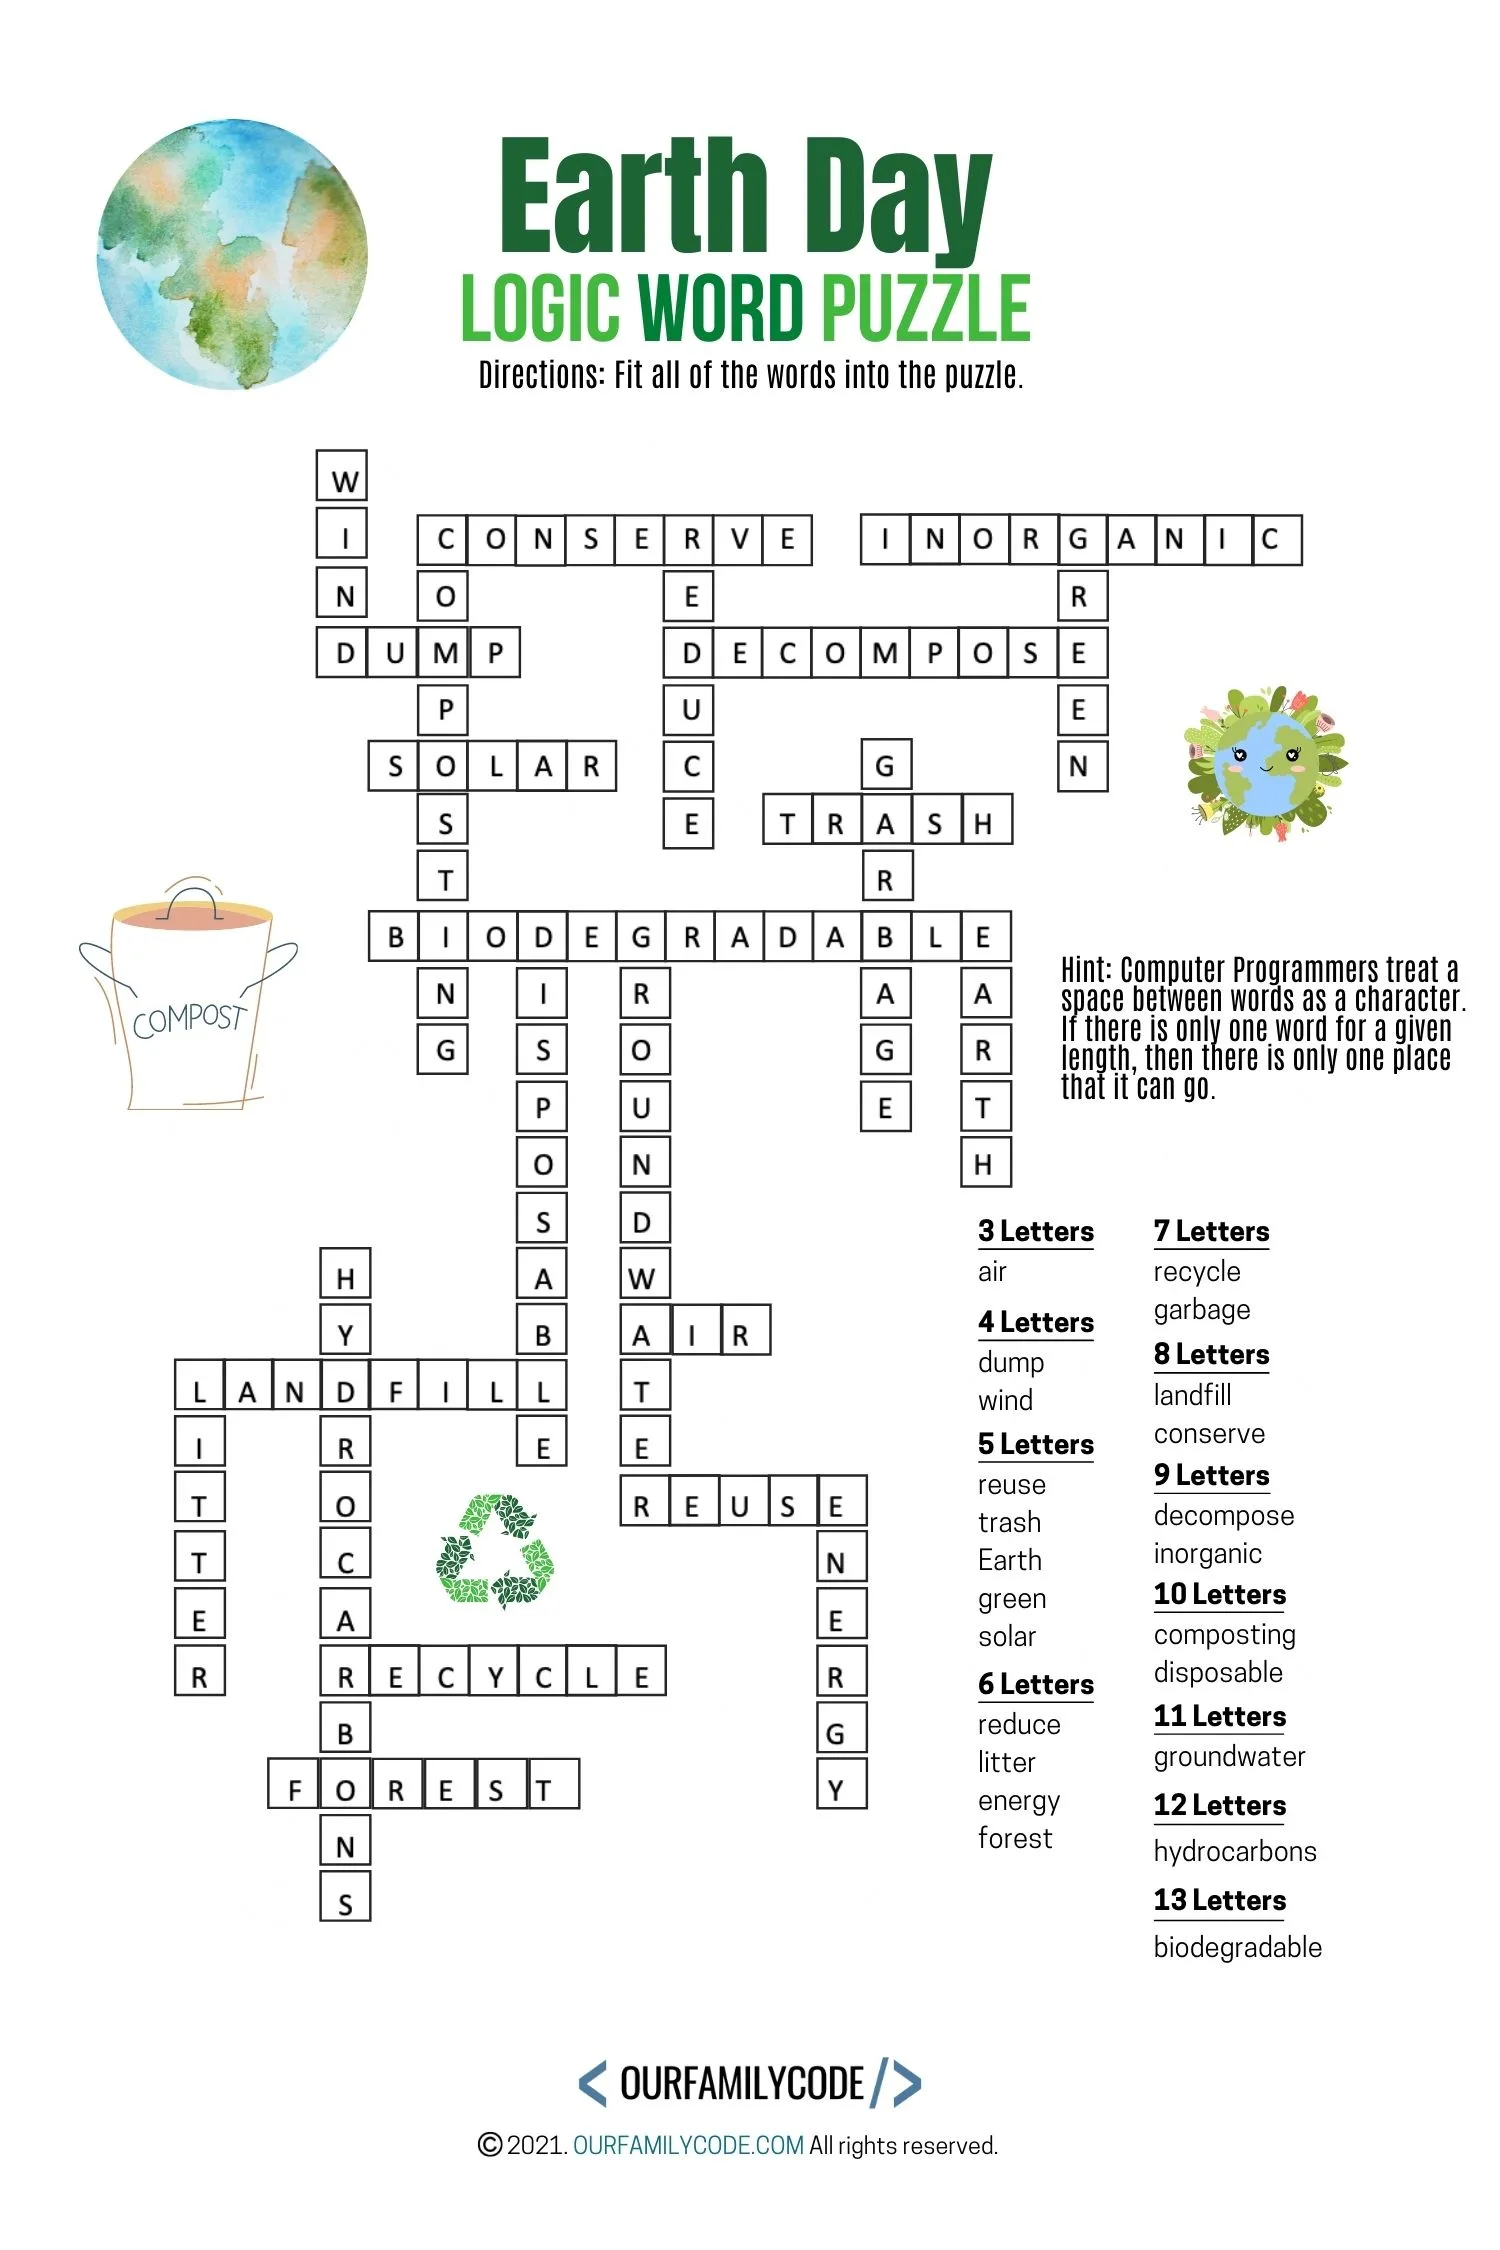 A picture of an Earth Day logic word puzzle with answers.